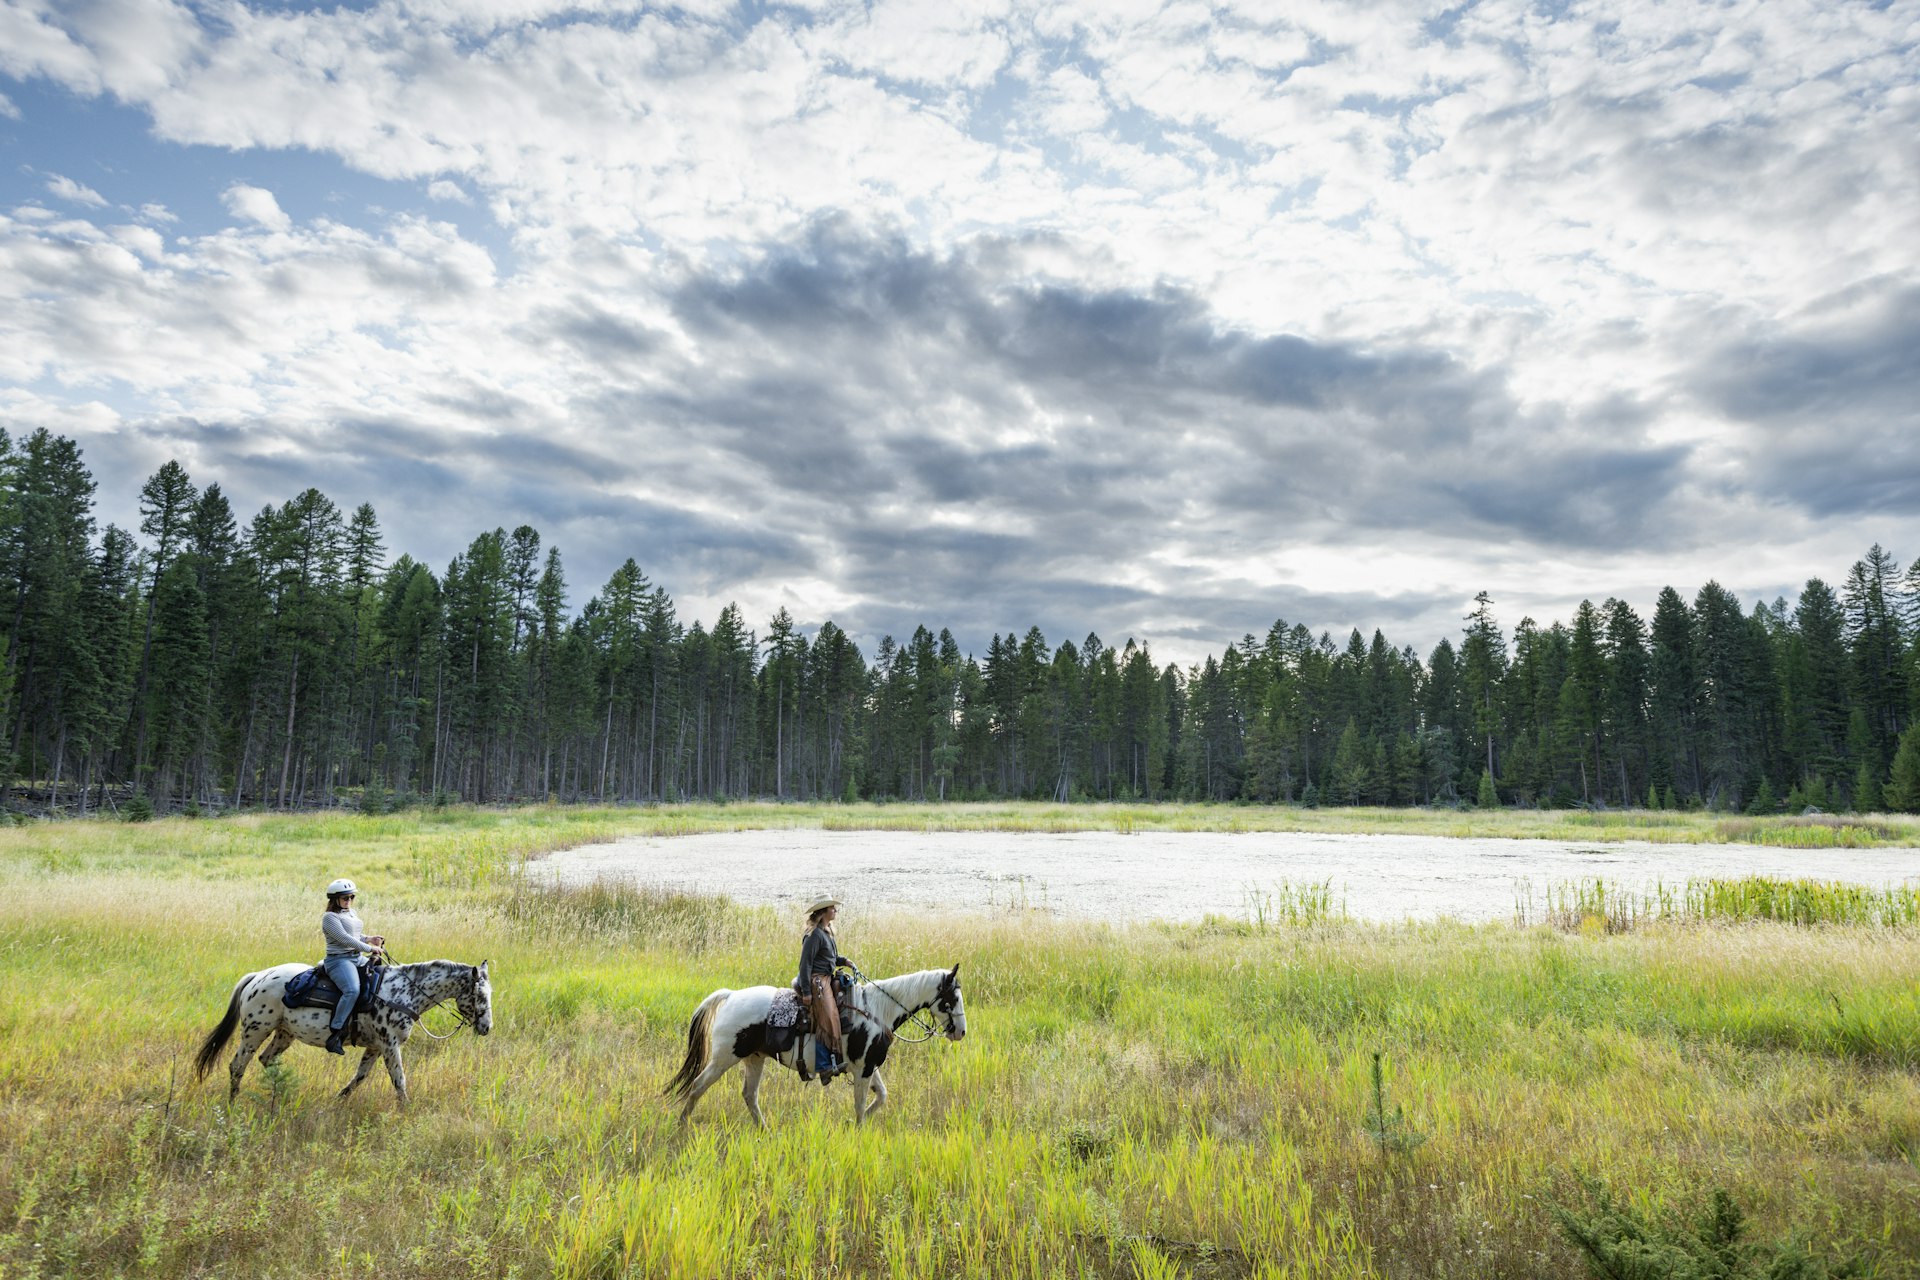 Two men riding horses in a forest clearing in Montana